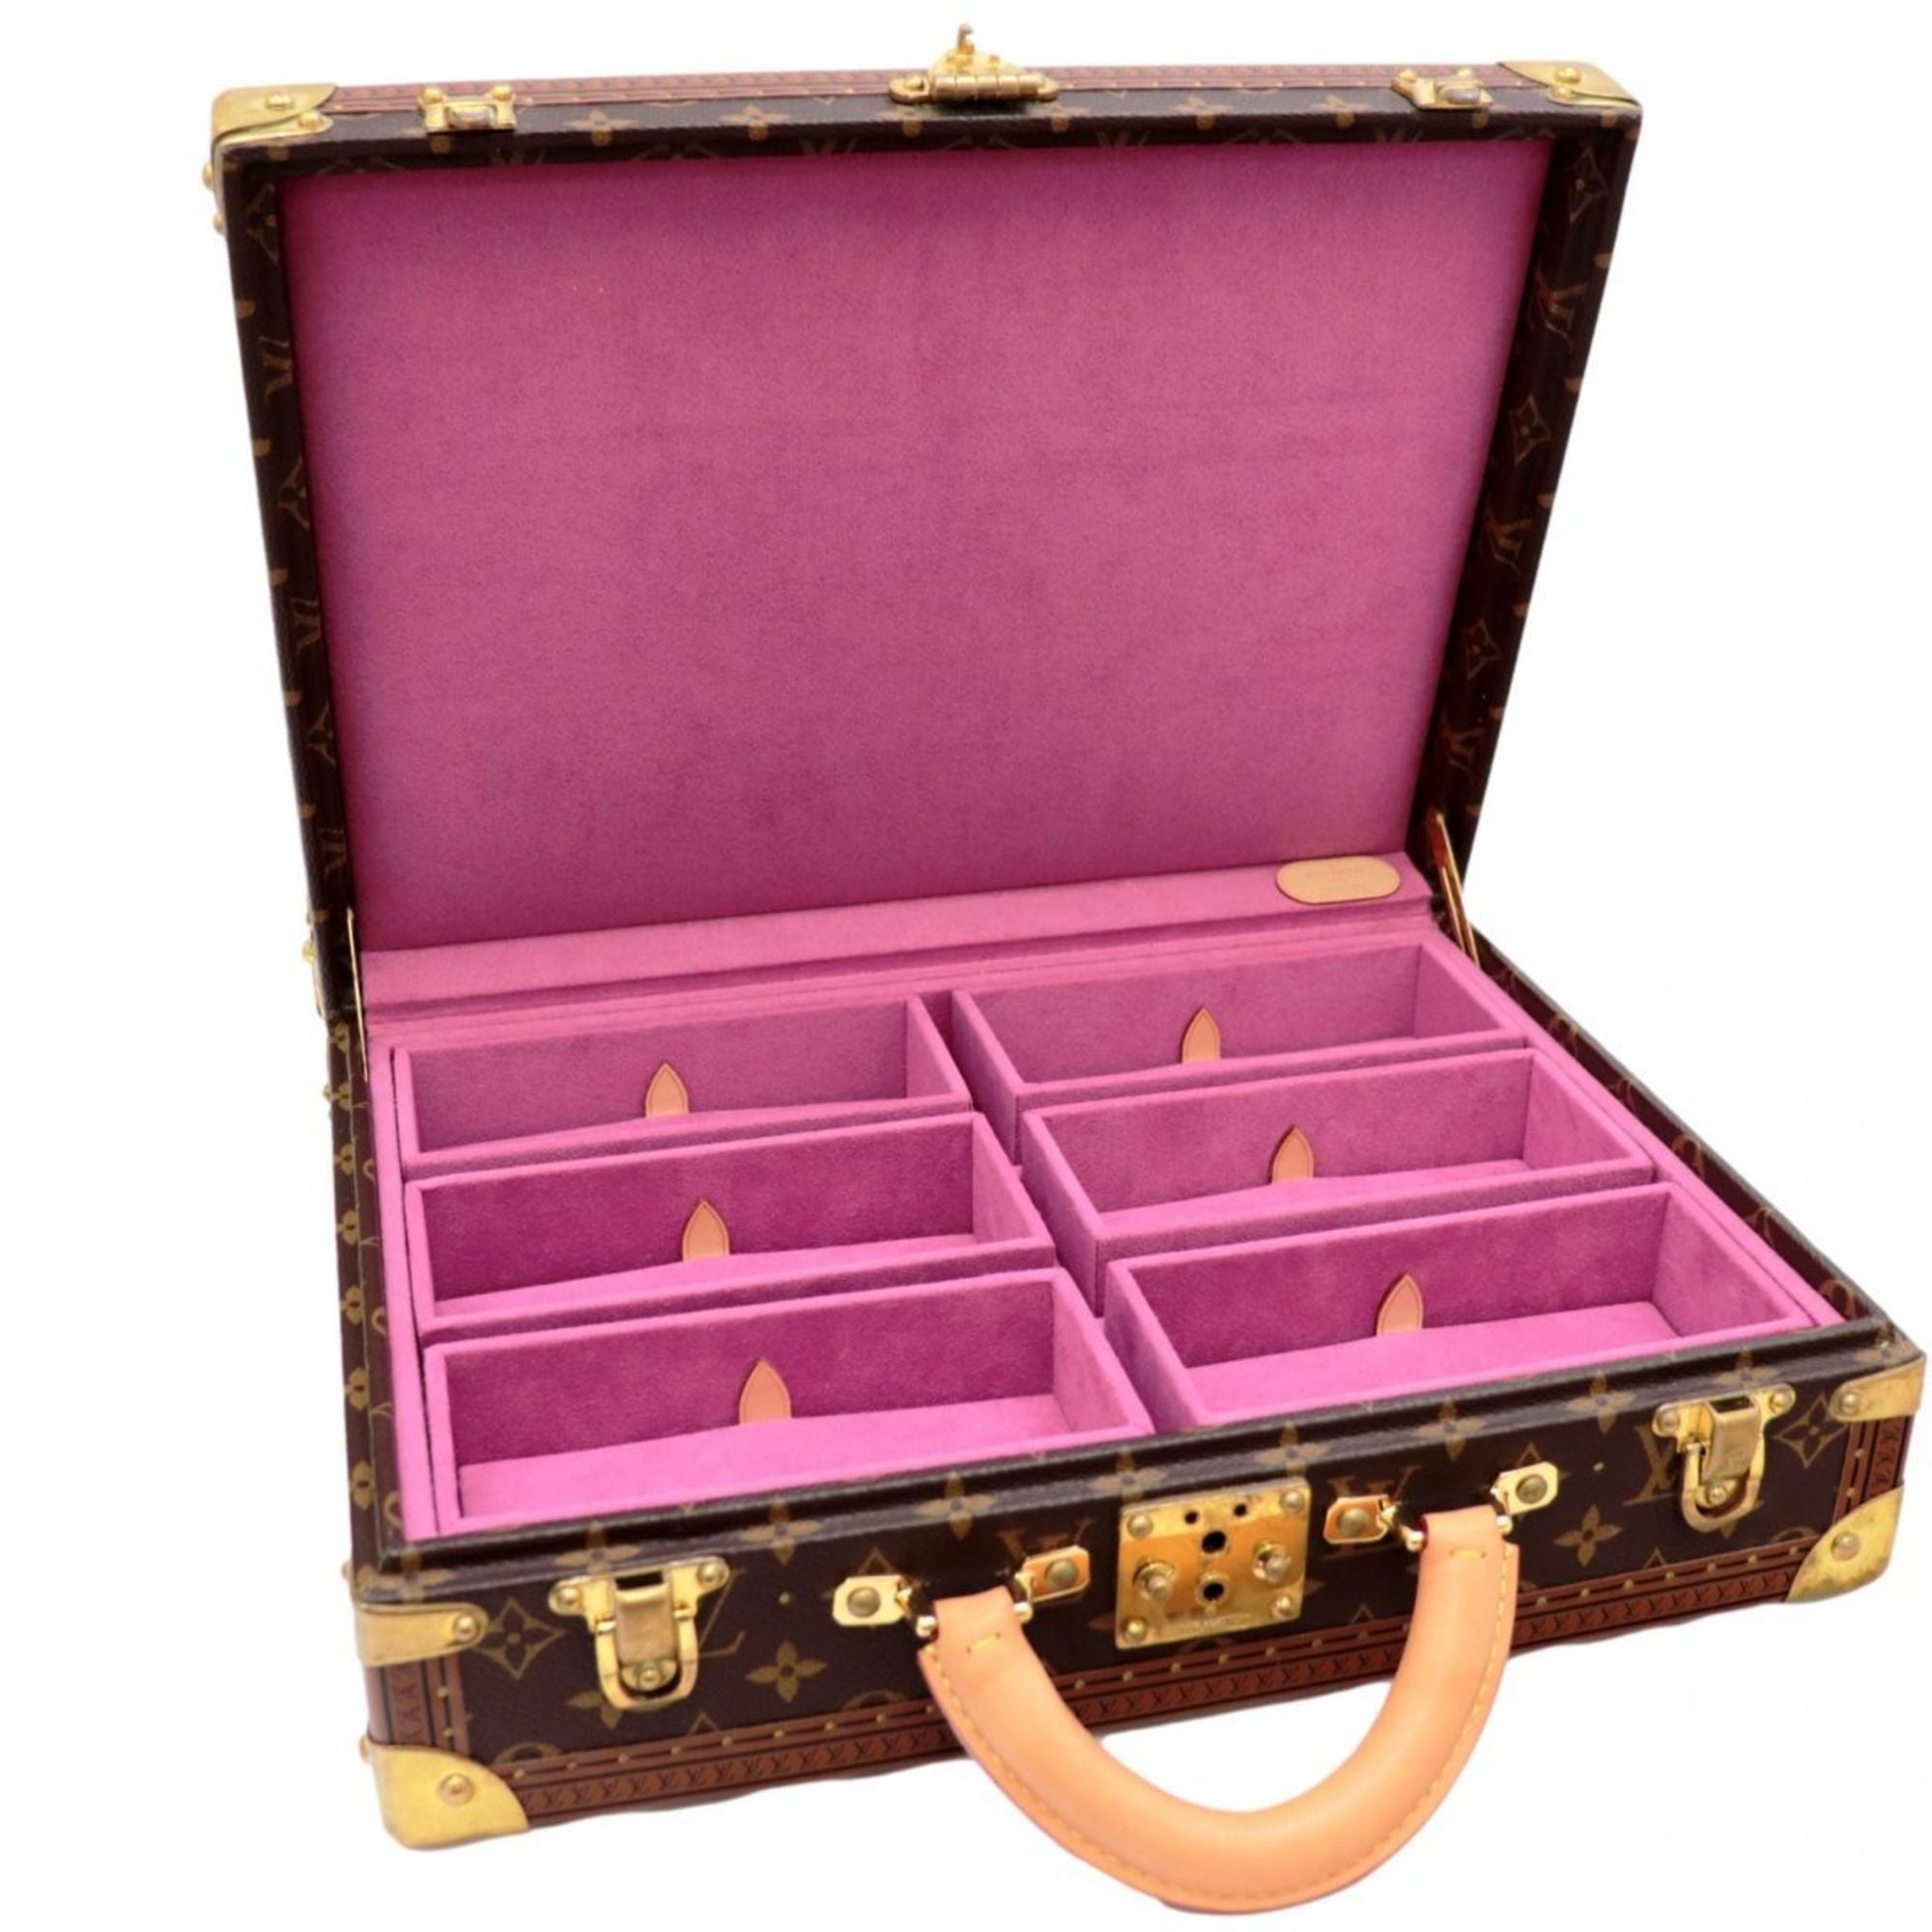 Authenticated used Louis Vuitton Monogram Trunk Jewelry Box Case Brown x Pink Purple Bag, Women's, Size: One Size